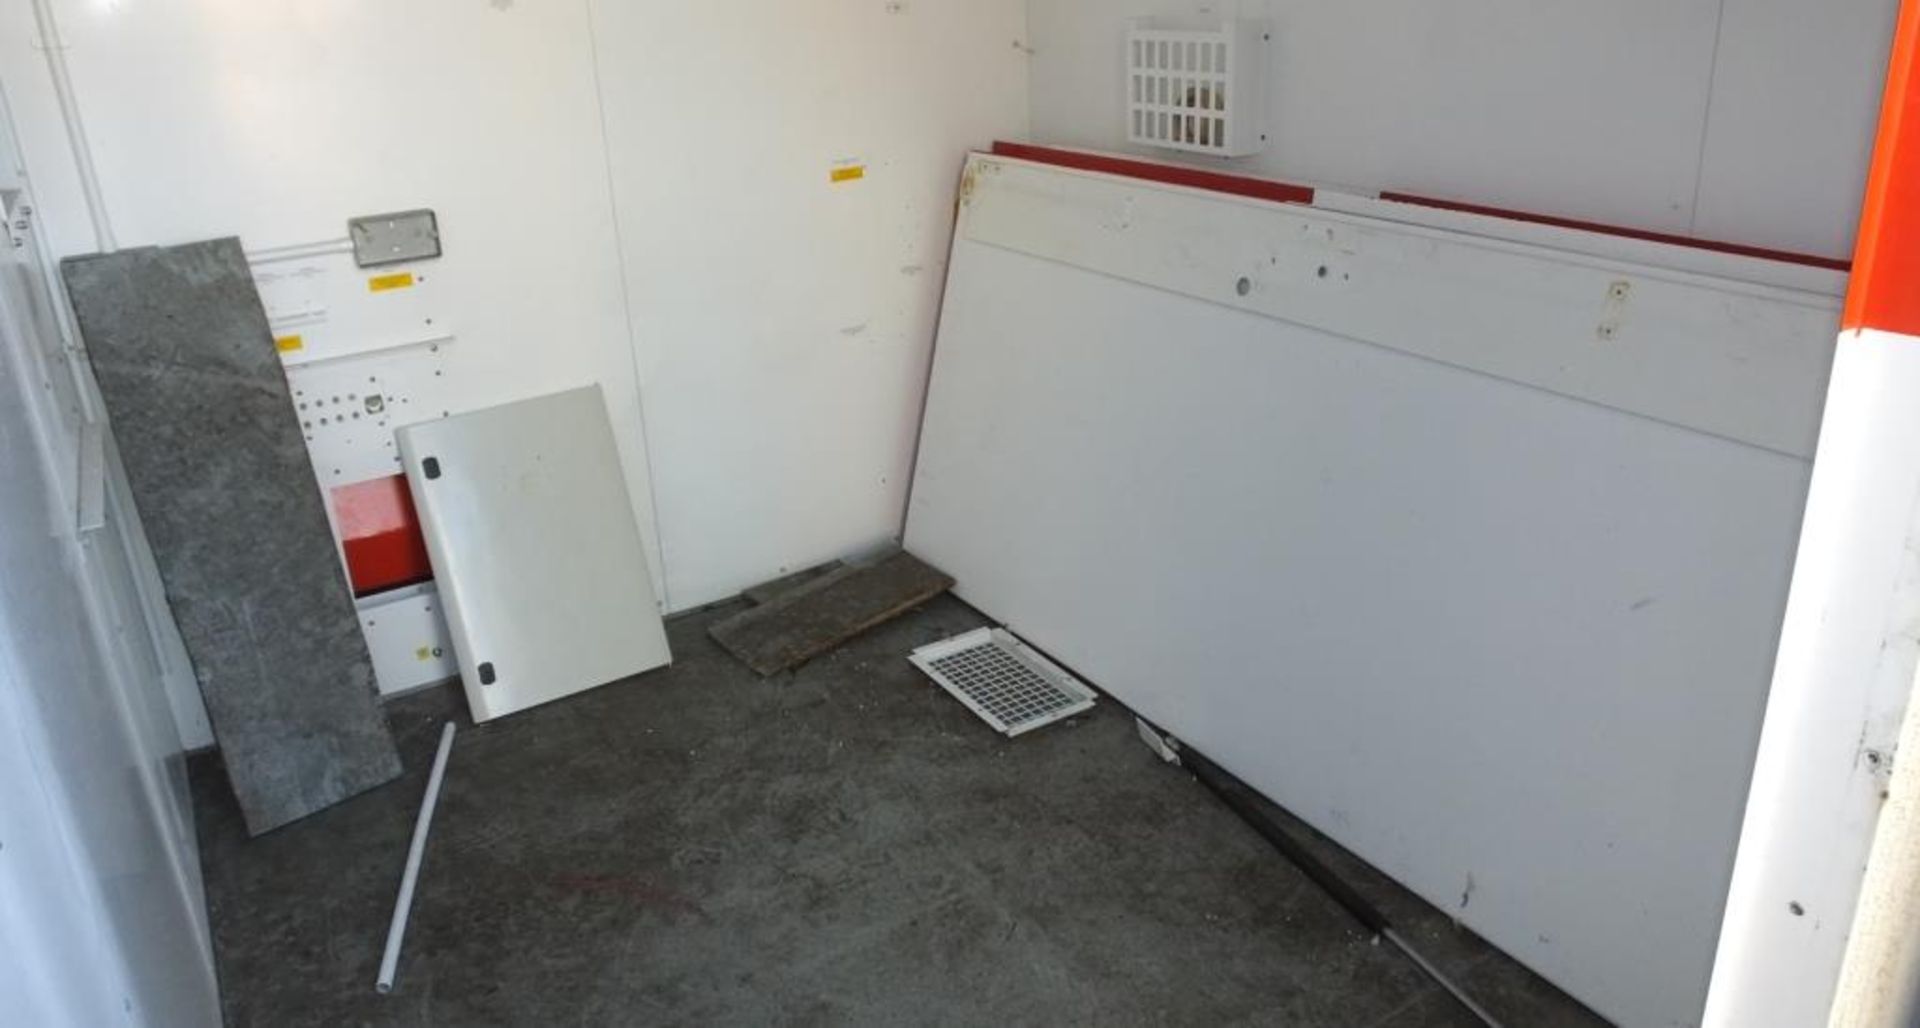 Cabin L 3.5M x W 2.5M x H 2.5M - Door off - £5+ Vat Loading Charge Applied to this Lot - Image 3 of 6